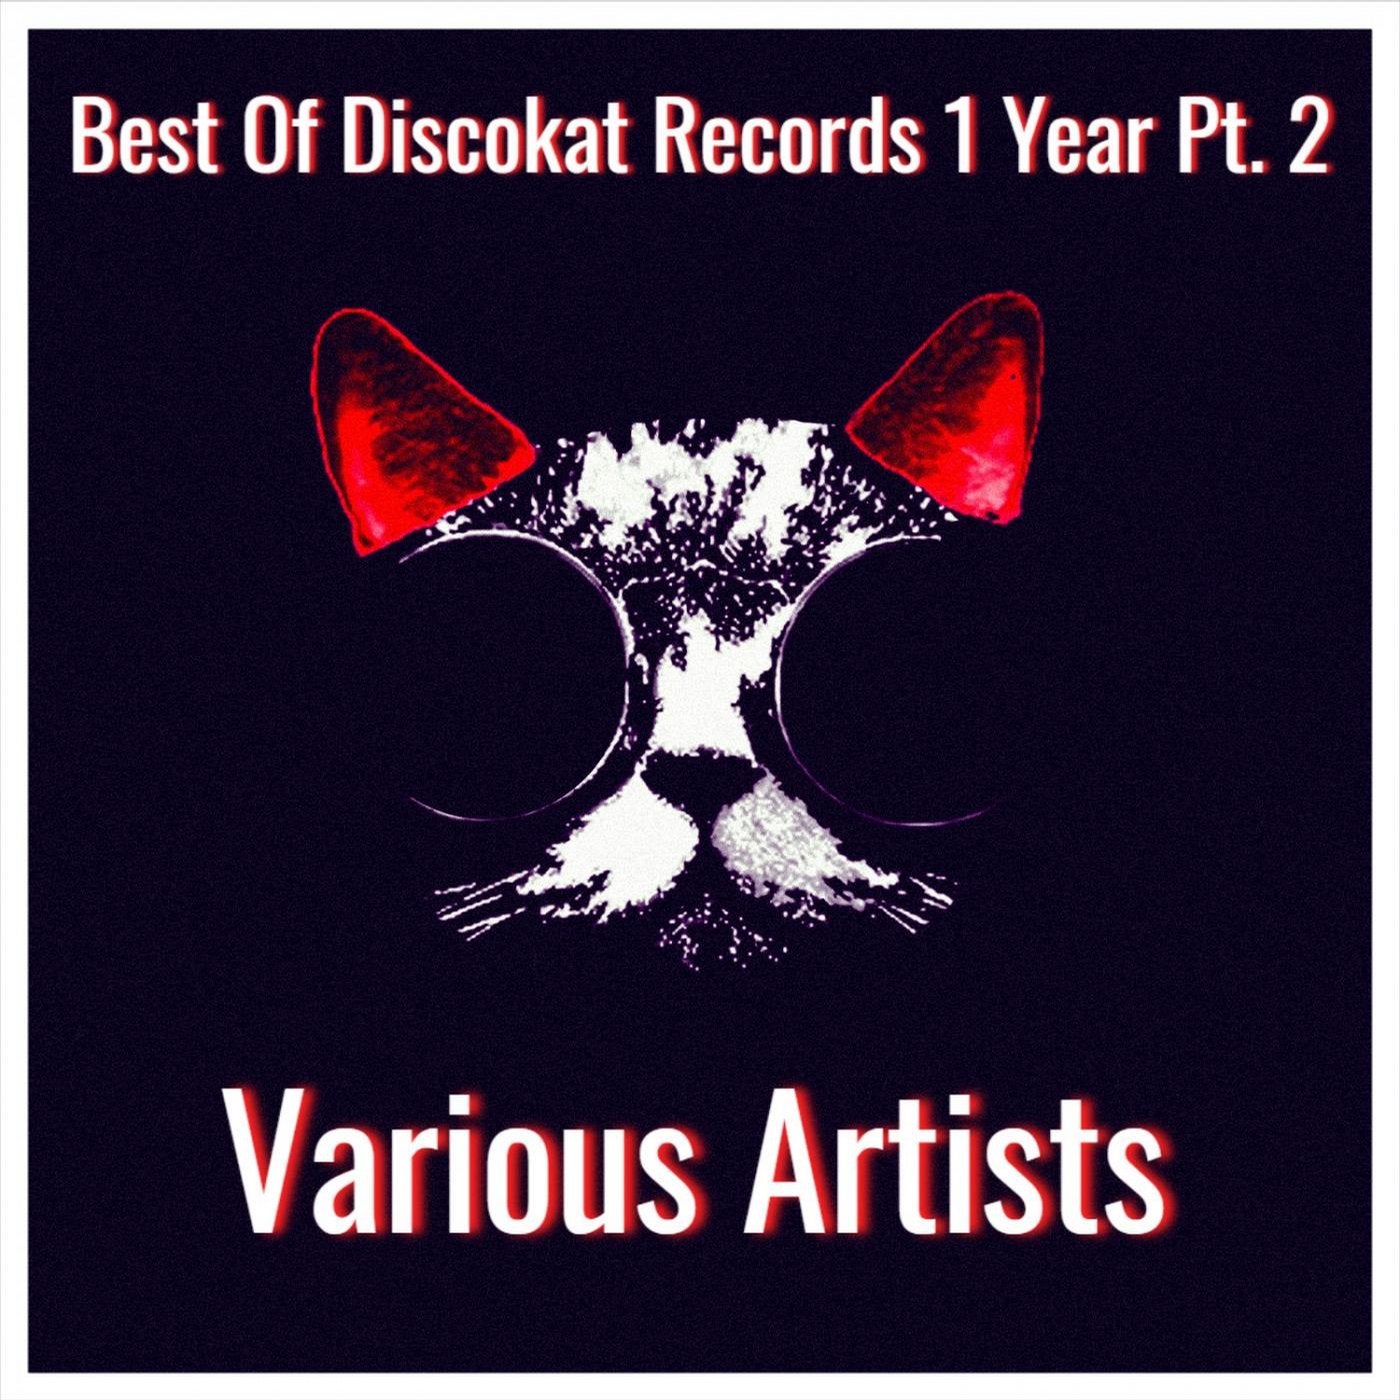 Best Of Discokat Records 1 Year Pt. 2